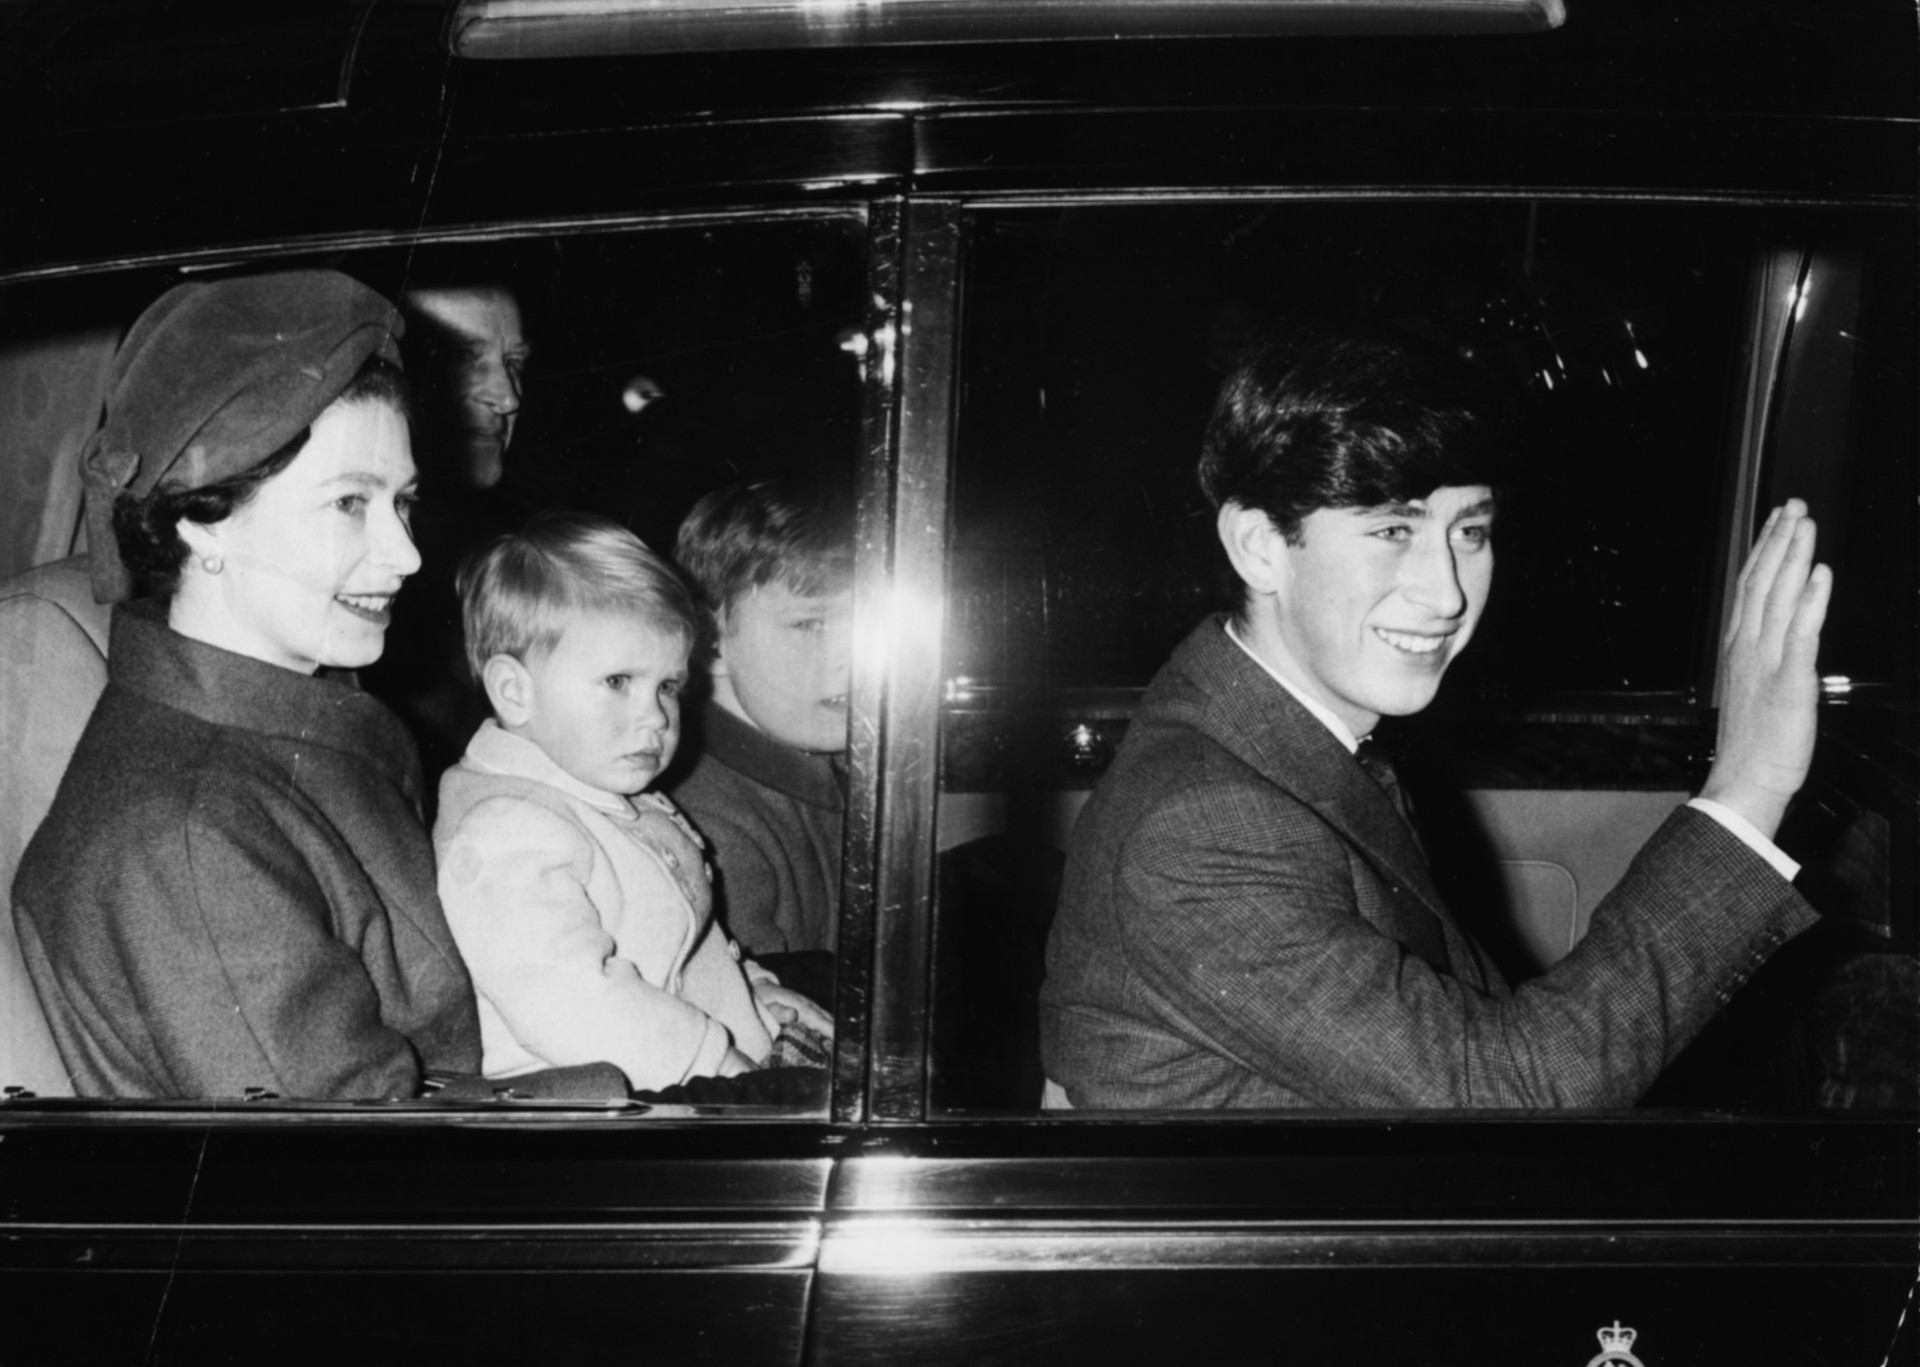 <p>Pictured with her husband and two children in a car. Queen Elizabeth II would give birth to Andrew in 1960 and Edward in 1964.</p> <p>See also: <a class="waffle-rich-text-link" href="https://www.msn.com/en-gb/news/other/things-every-home-in-the-70s-had-that-you-rarely-see-today/ss-AA1nfcLP?disableErrorRedirect=true&infiniteContentCount=0">Things every home in the '70s had that you rarely see today</a></p><p>You may also like:<a href="https://www.starsinsider.com/n/499961?utm_source=msn.com&utm_medium=display&utm_campaign=referral_description&utm_content=203154v10en-au"> The gods, goddesses, and legendary heroes of Celtic folklore</a></p>